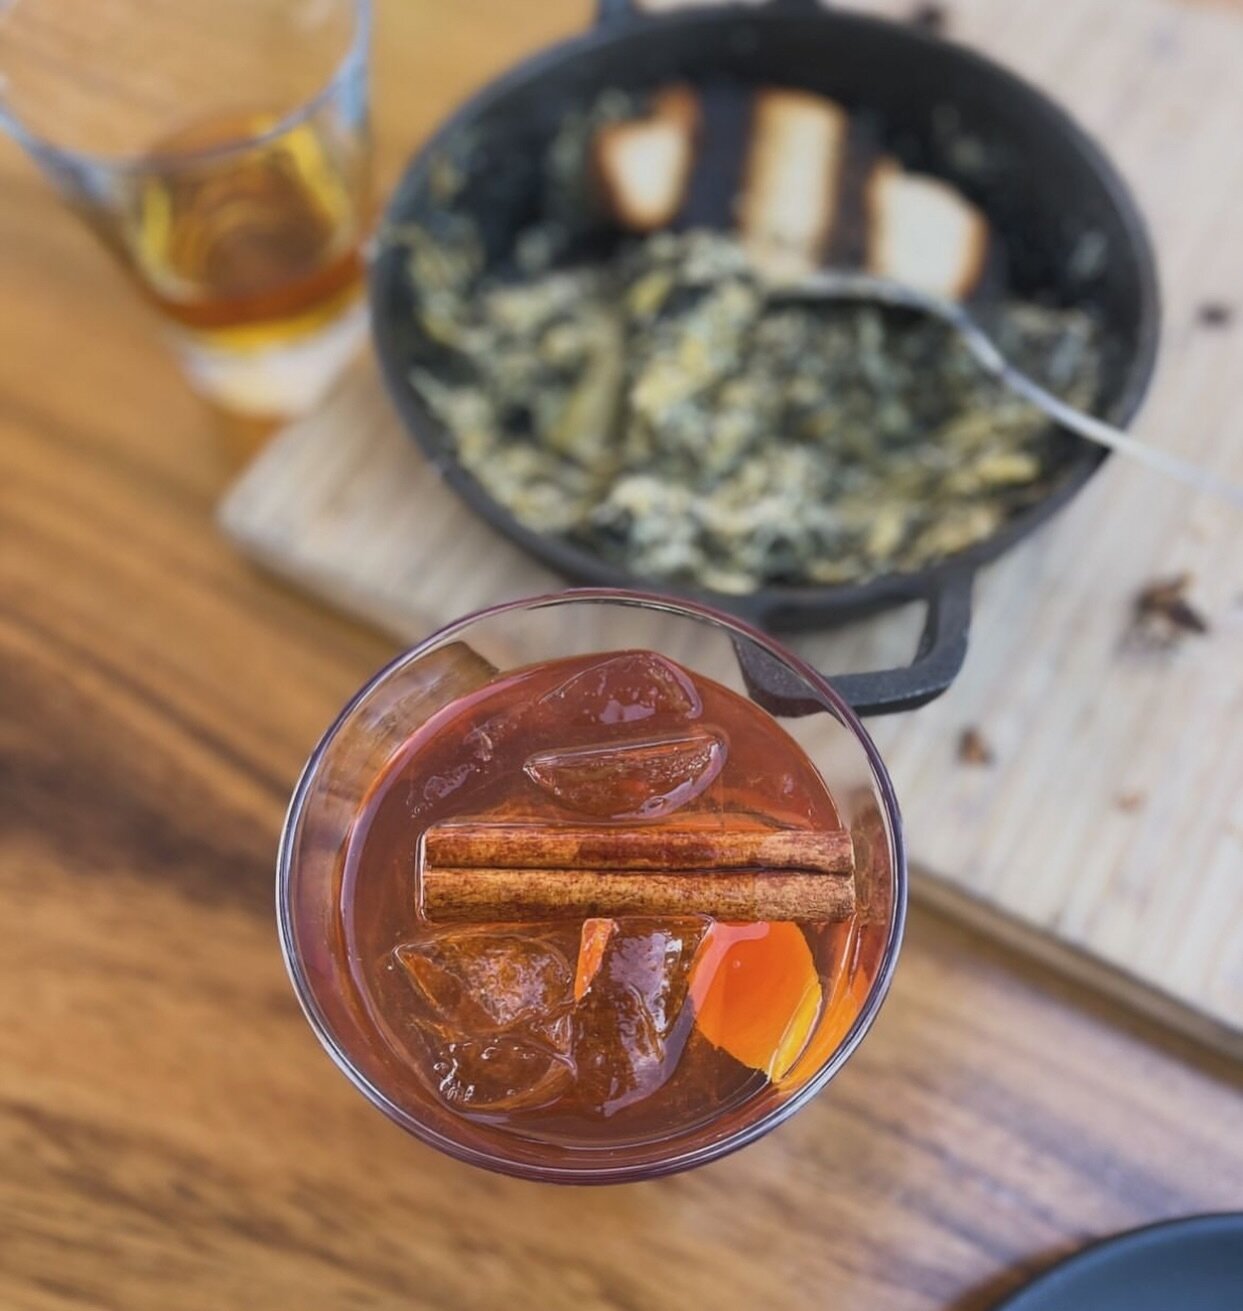 New to the menu: Cali Chai Old Fashioned 🥃
bulleit bourbon, vanilla chai simple syrup, angostura bitters 📸: @sippingsandiego